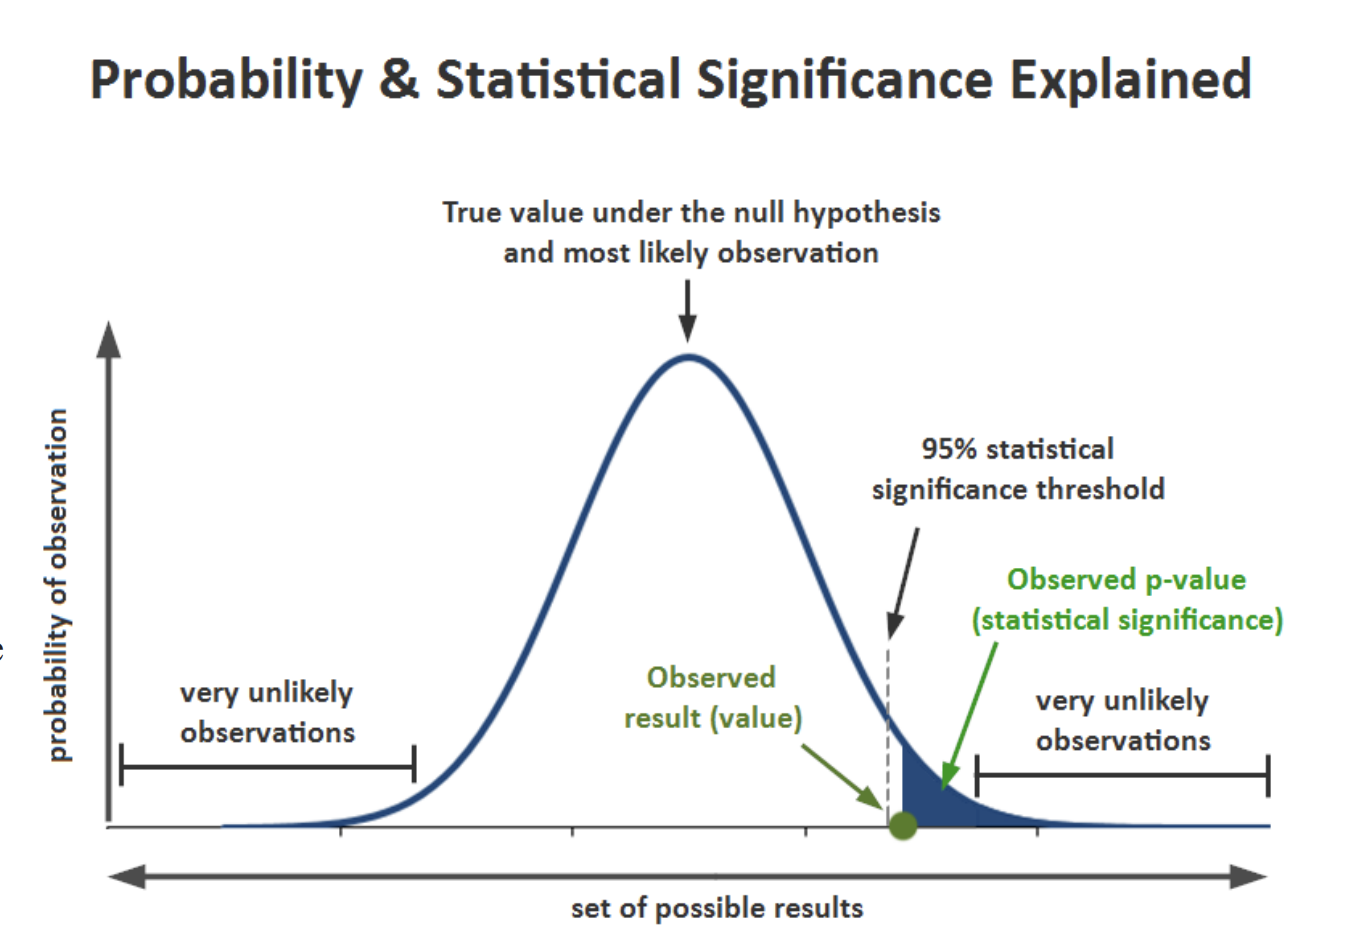 Graph: "Probability & Statistical Signifigance Explained"